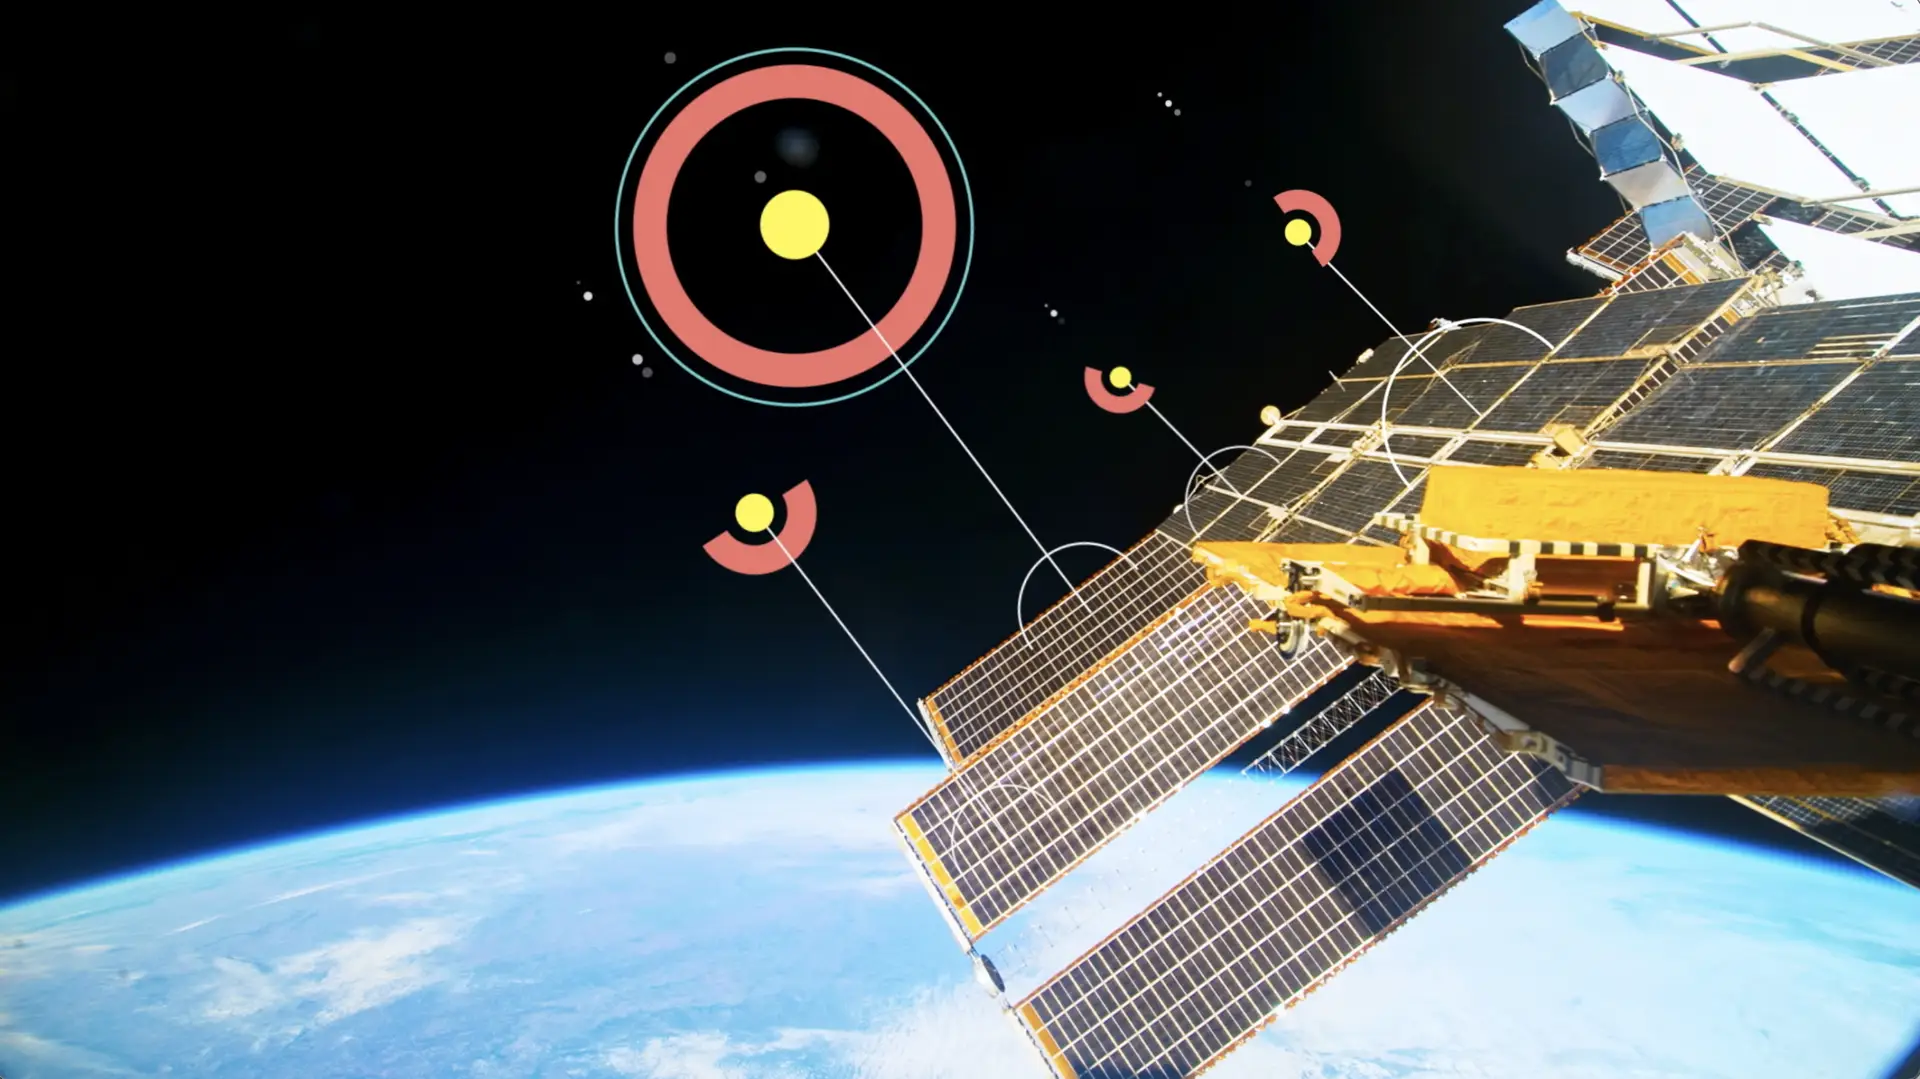 An image of a space station with a satellite in the background, symbolizing the innovative strategies taught in Harvard Business School's MBA programs.